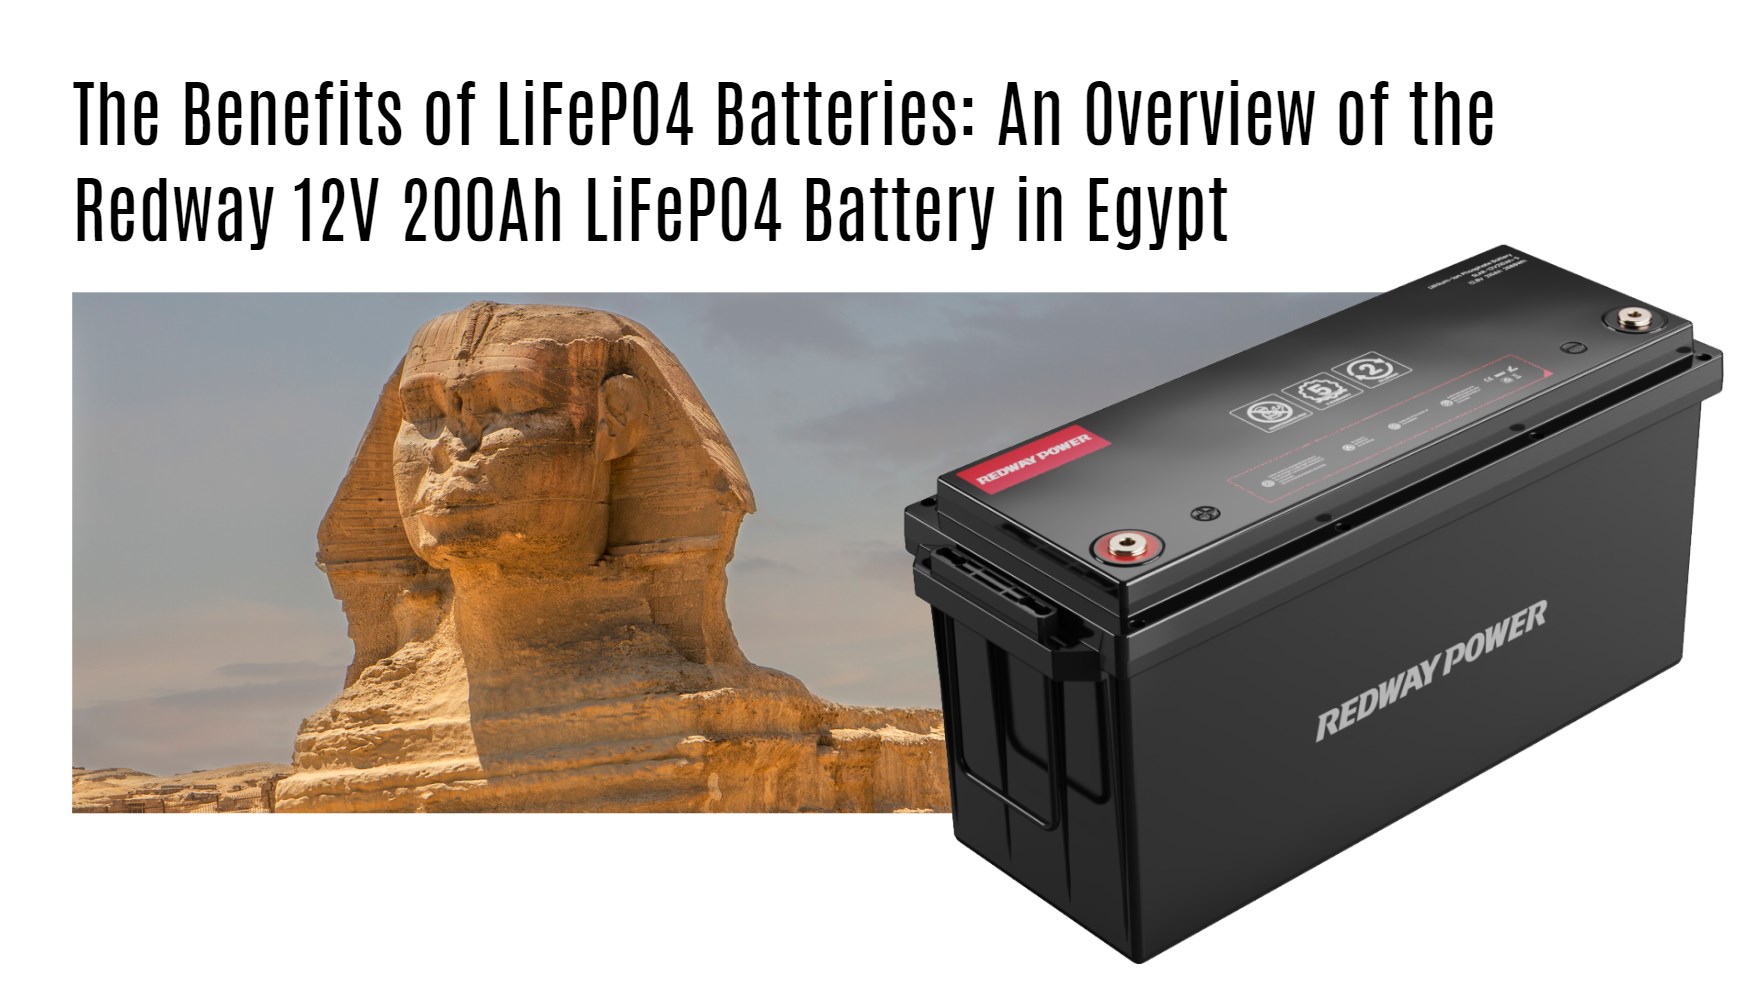 The Benefits of LiFePO4 Batteries: An Overview of the Redway 12V 200Ah LiFePO4 Battery in Egypt